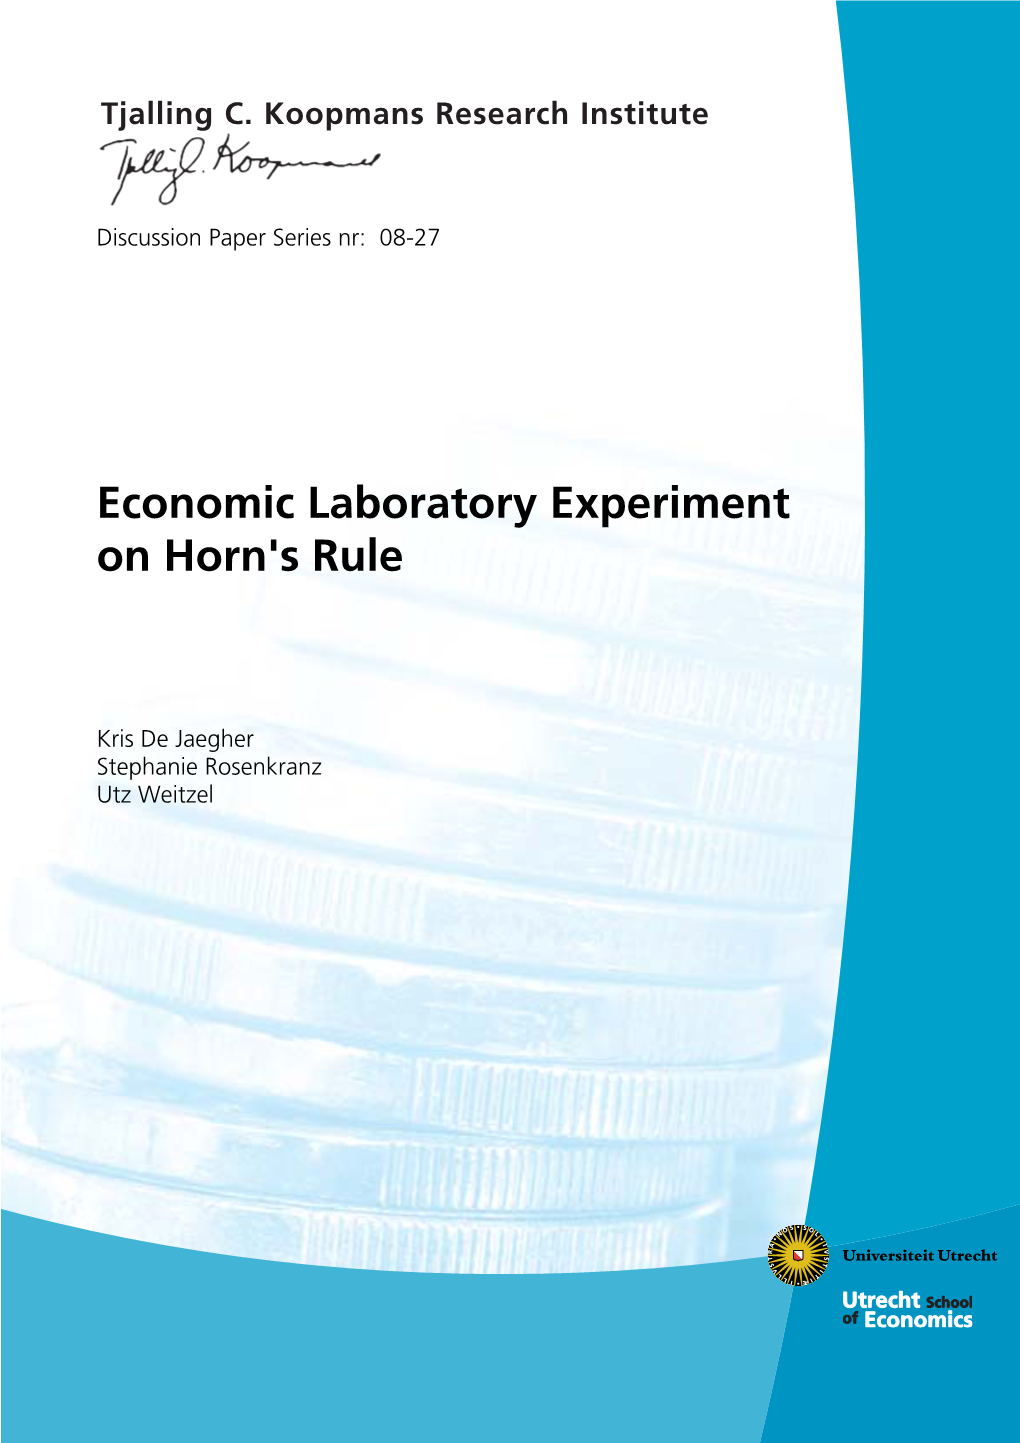 Economic Laboratory Experiment on Horn's Rule